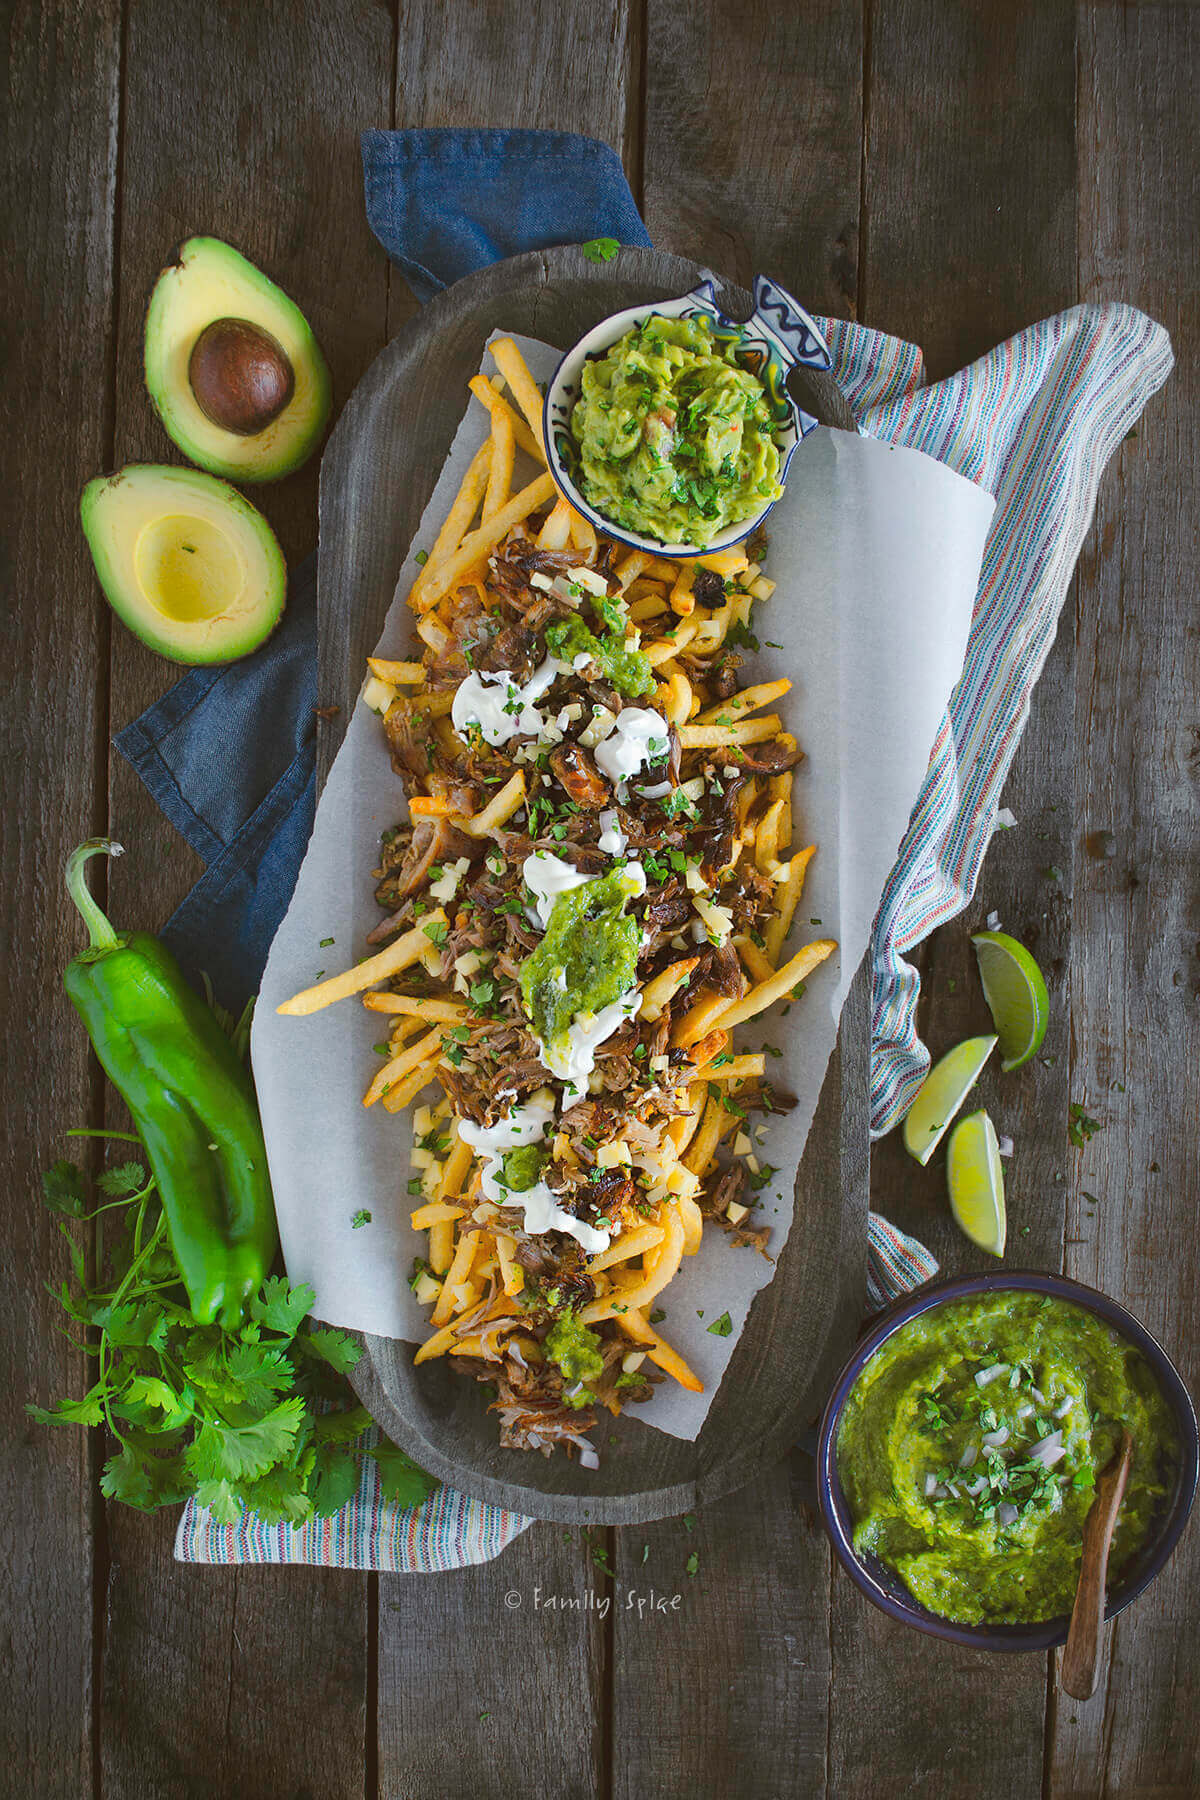 Top view of a platter of french fries topped with shredded pork chile verde, cheese, guacamole and sour cream